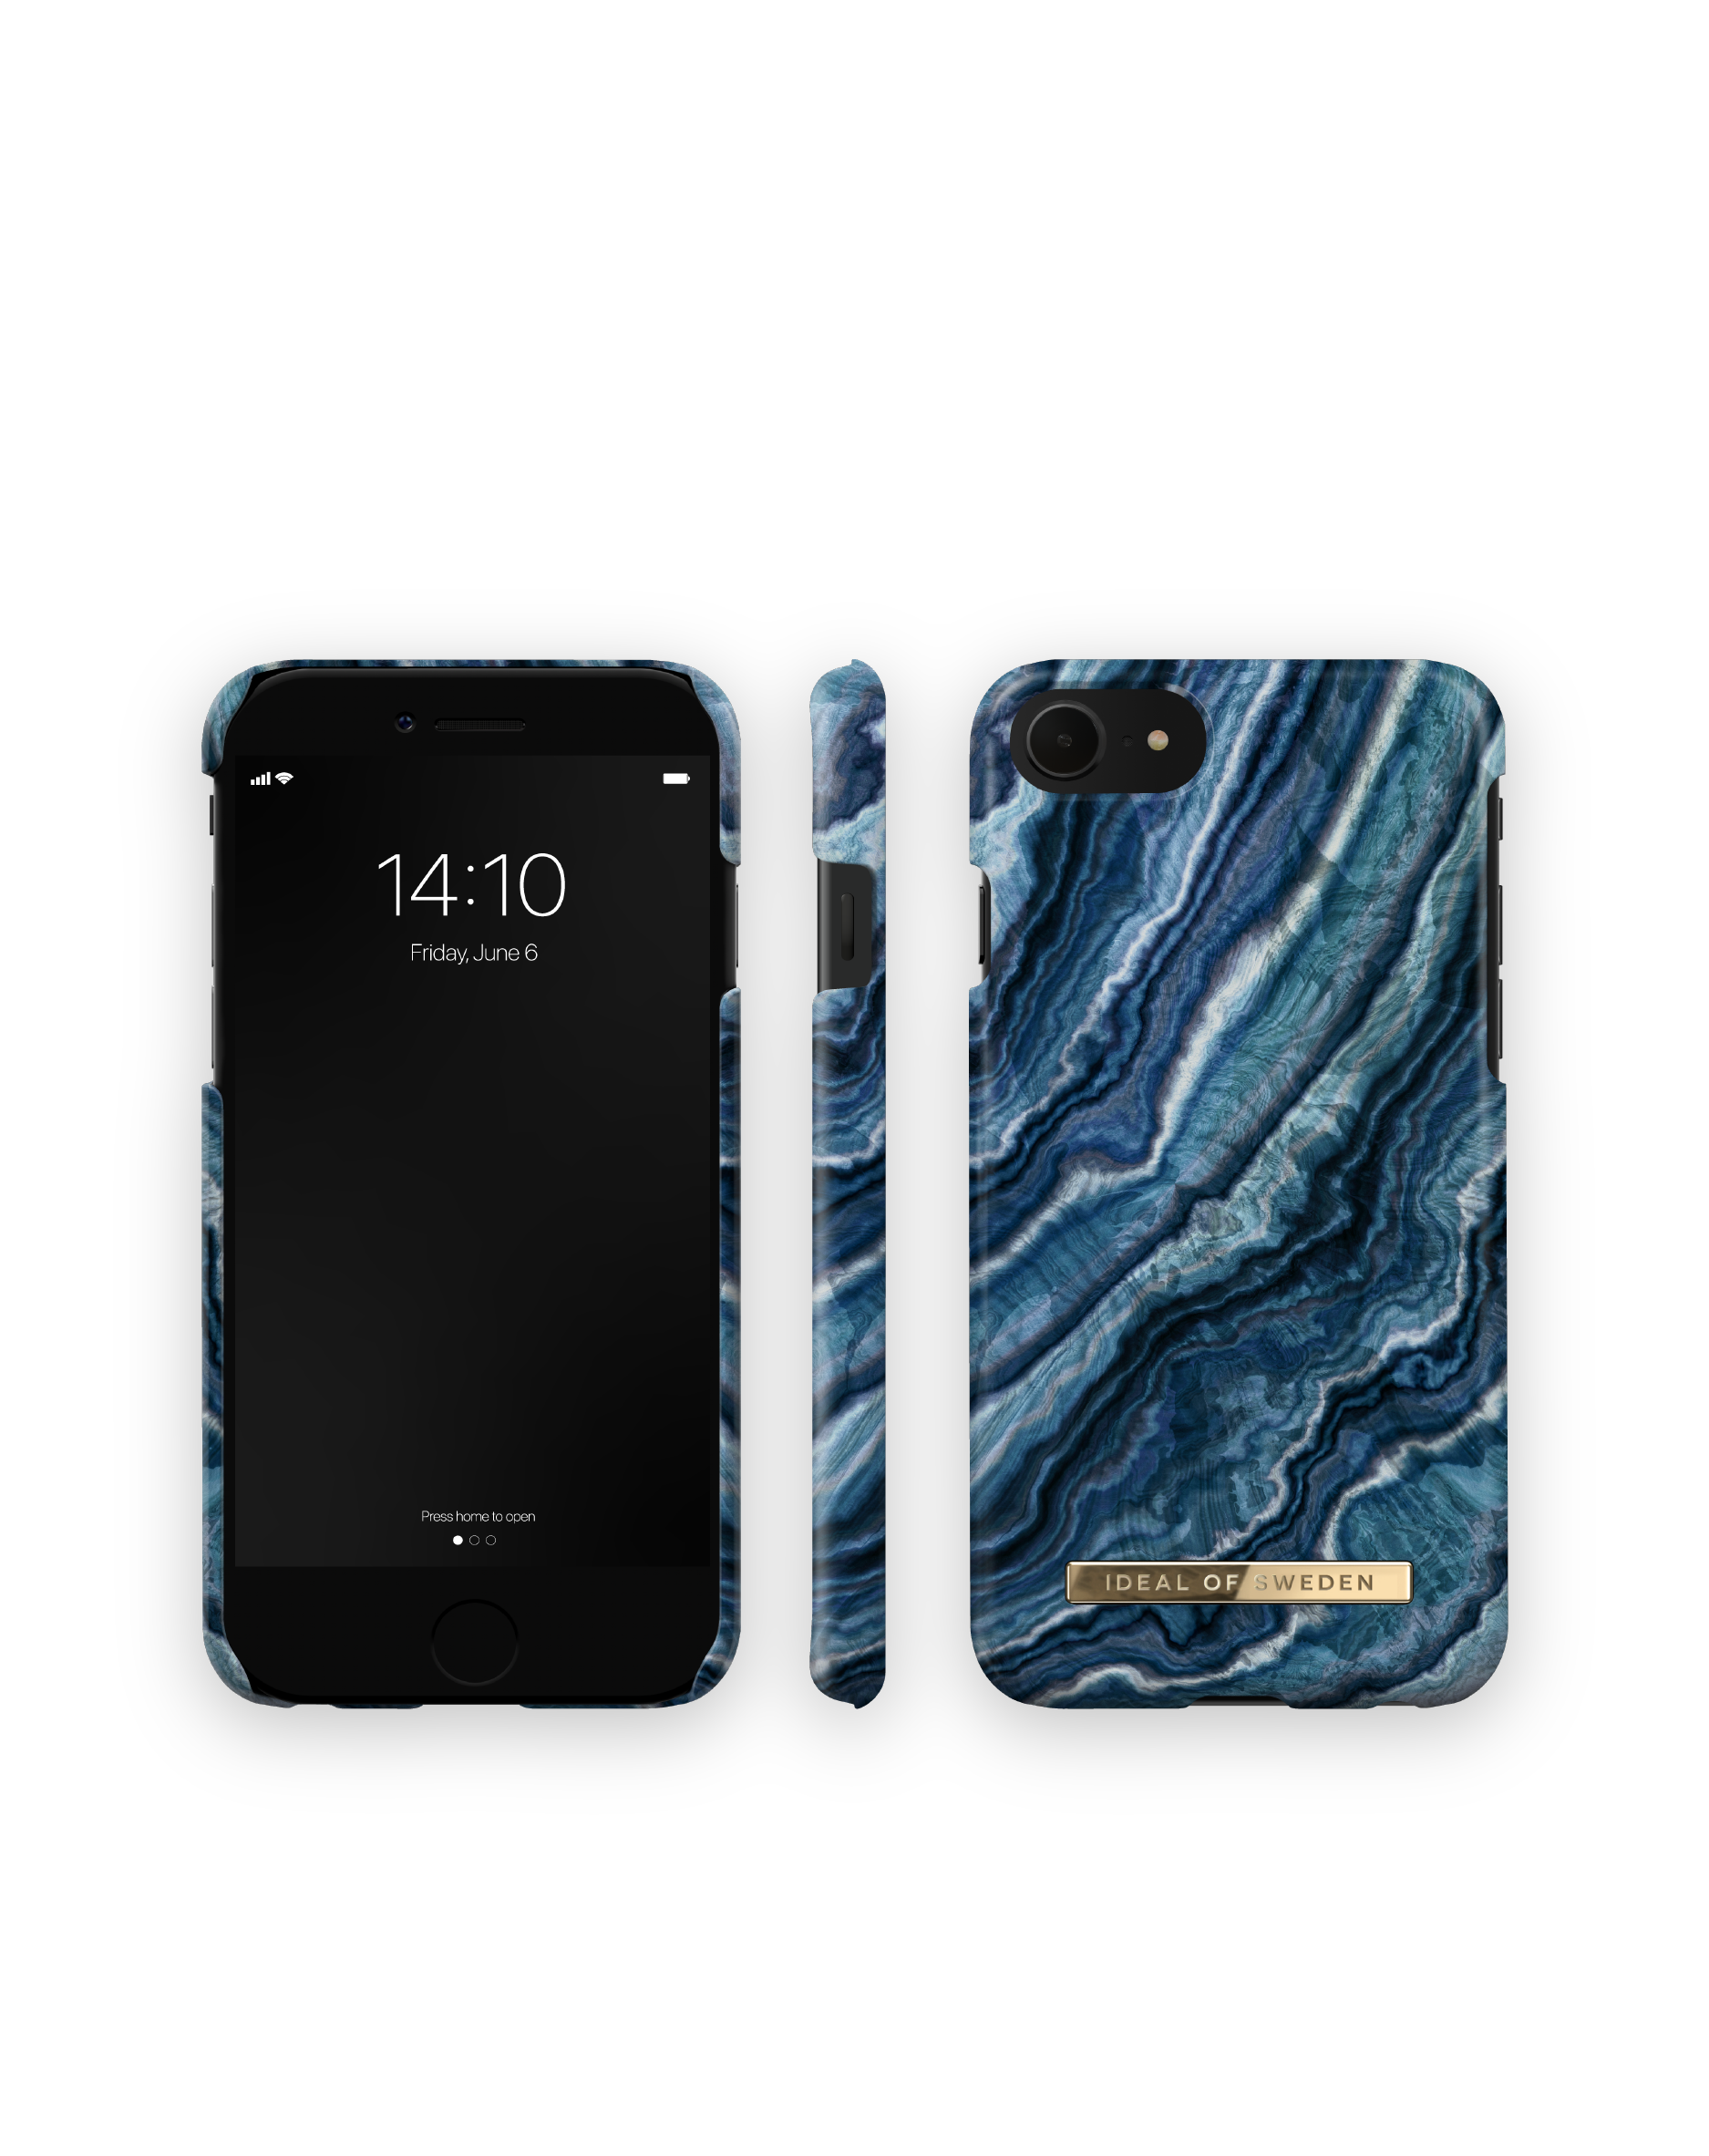 IDEAL OF SWEDEN IDFCSS19-I7-119, Backcover, 8, iPhone iPhone Apple Apple 6(S), iPhone Swirl (2020), Indigo Apple 7, Apple Apple, iPhone SE